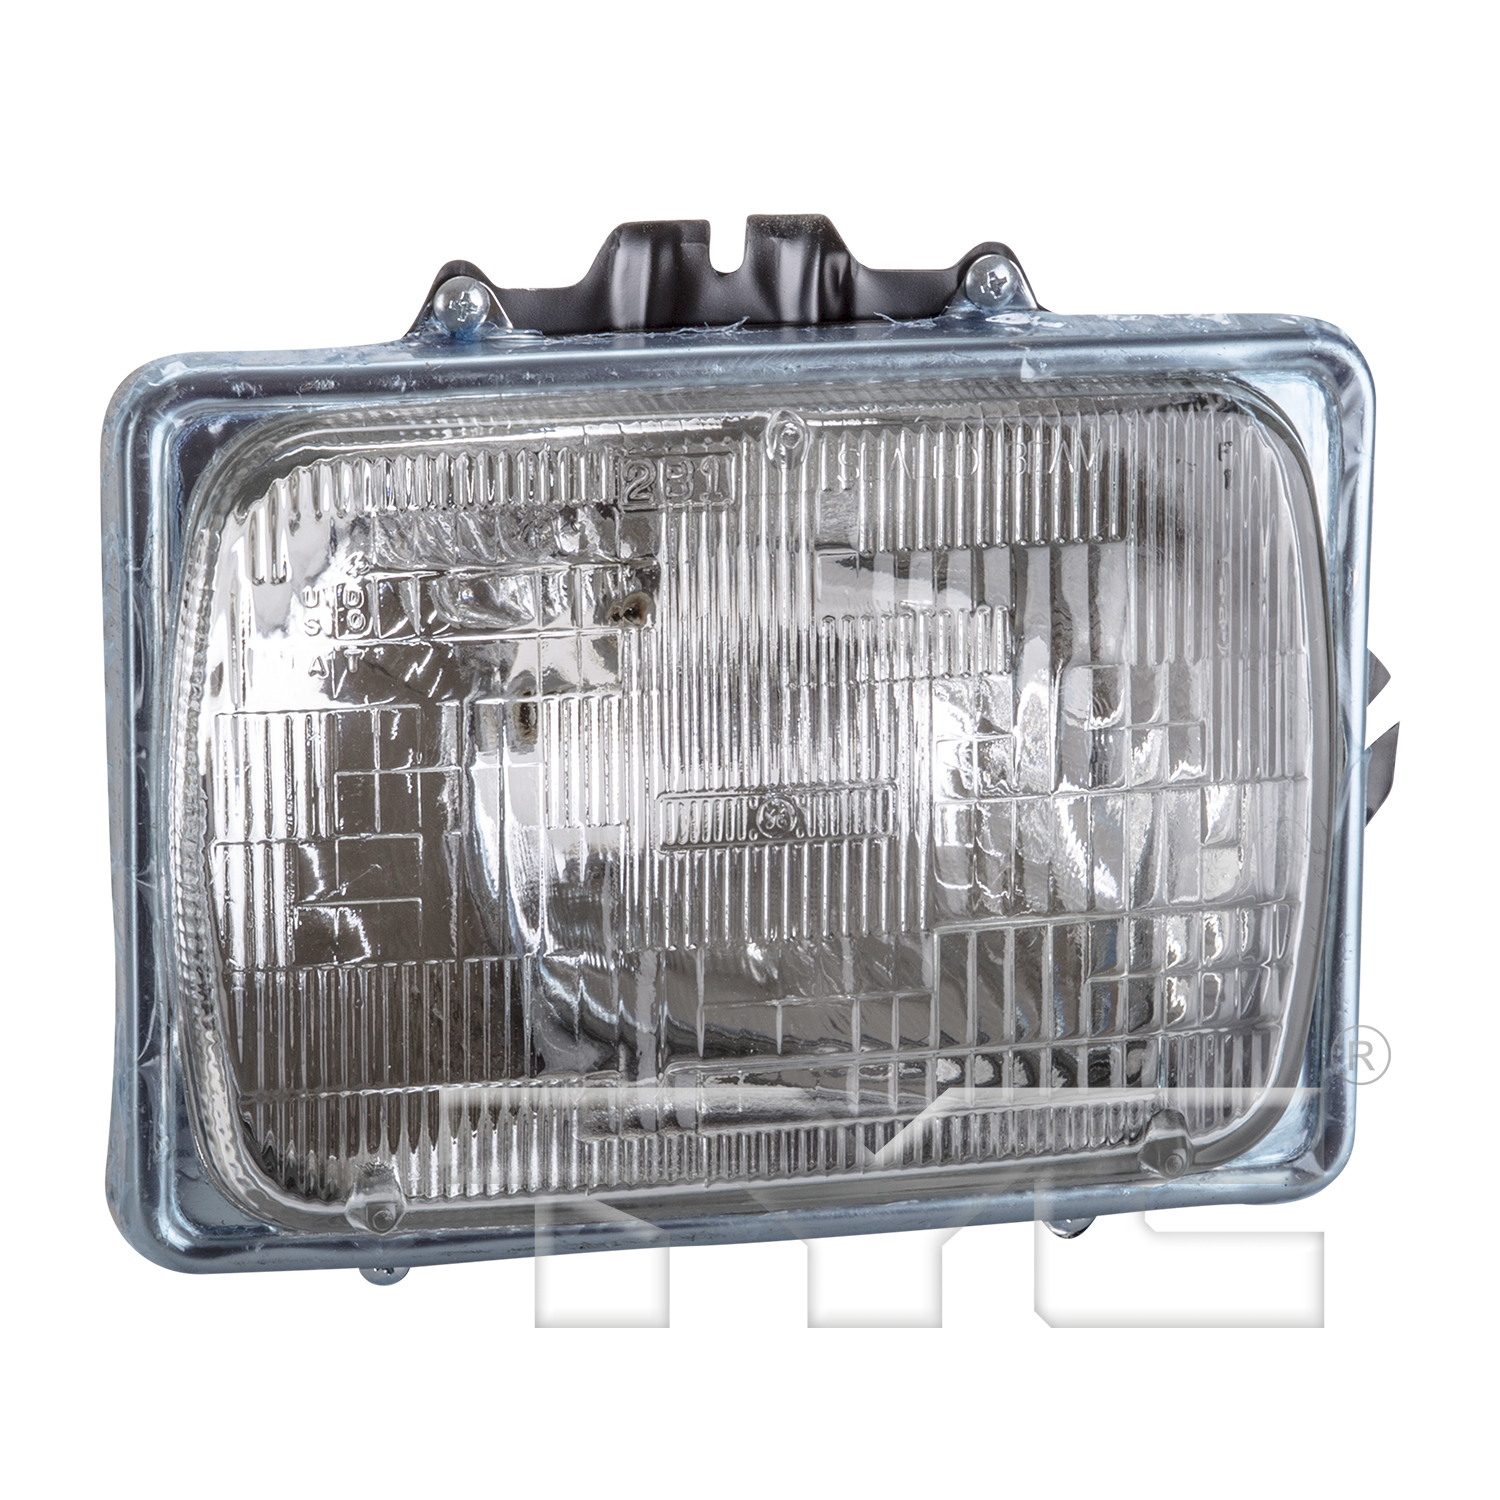 Aftermarket HEADLIGHTS for FORD - F-250 SUPER DUTY, F-250 SUPER DUTY,99-07,RT Headlamp assy sealed beam